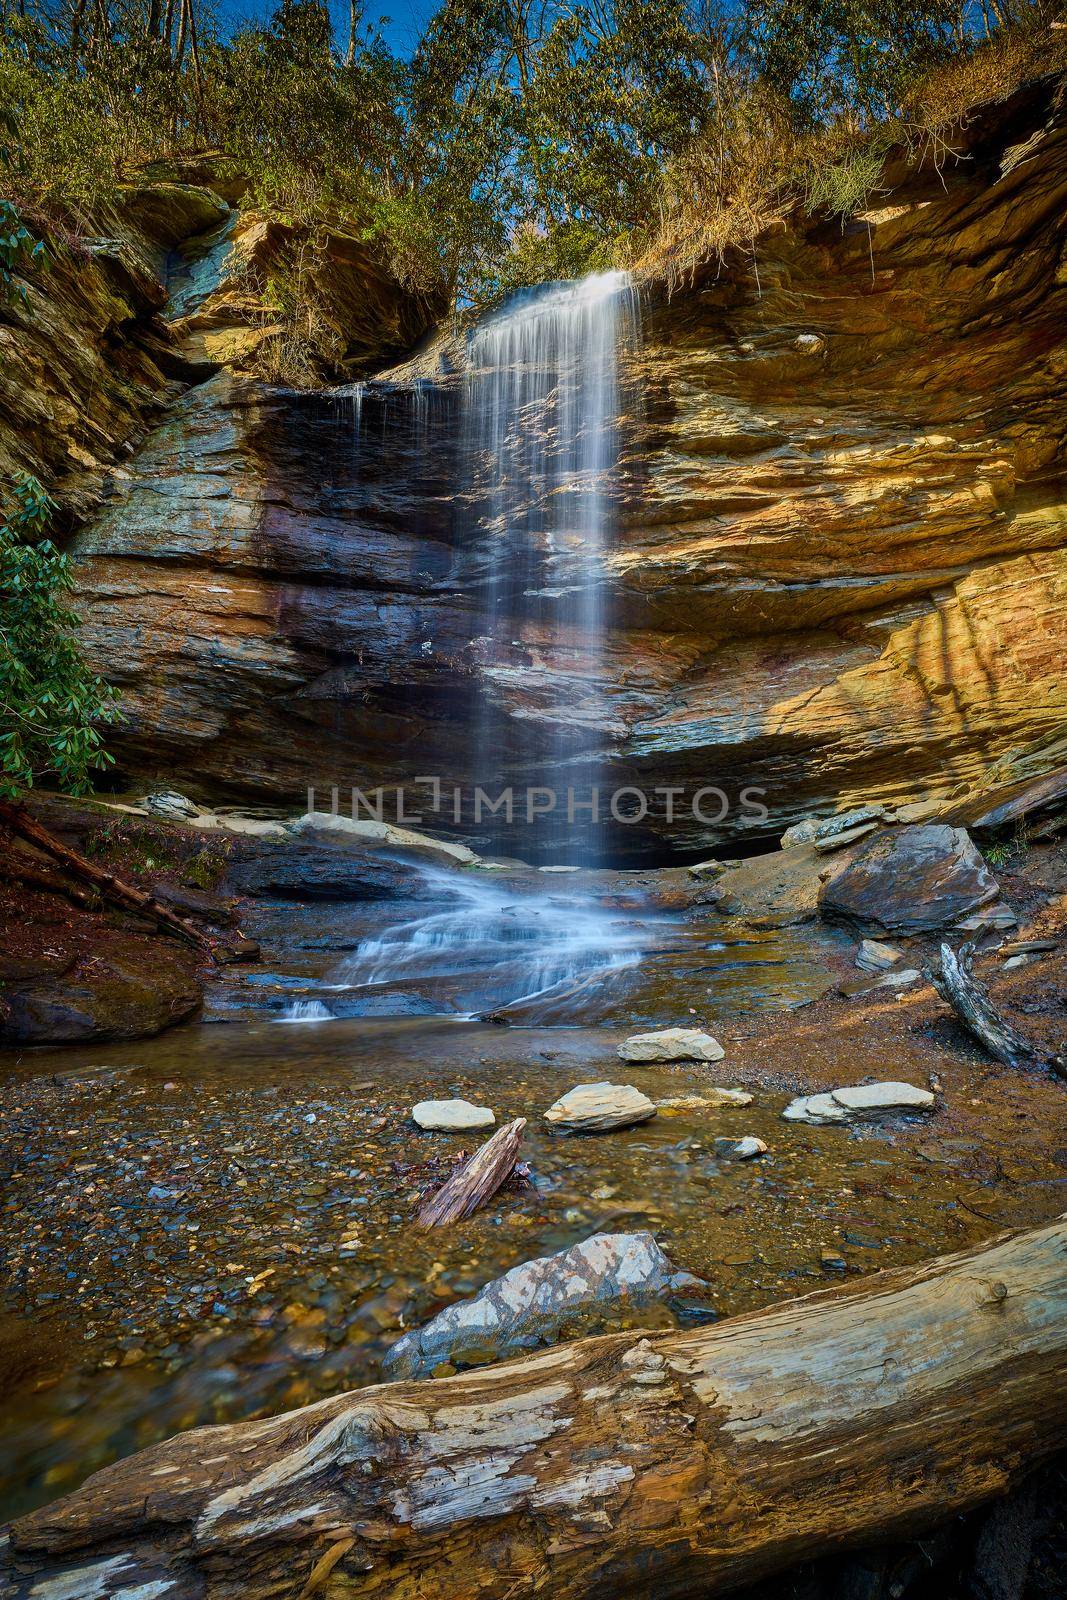 Moore Cove Waterfall in Pisgah National Forest near Brevard NC.